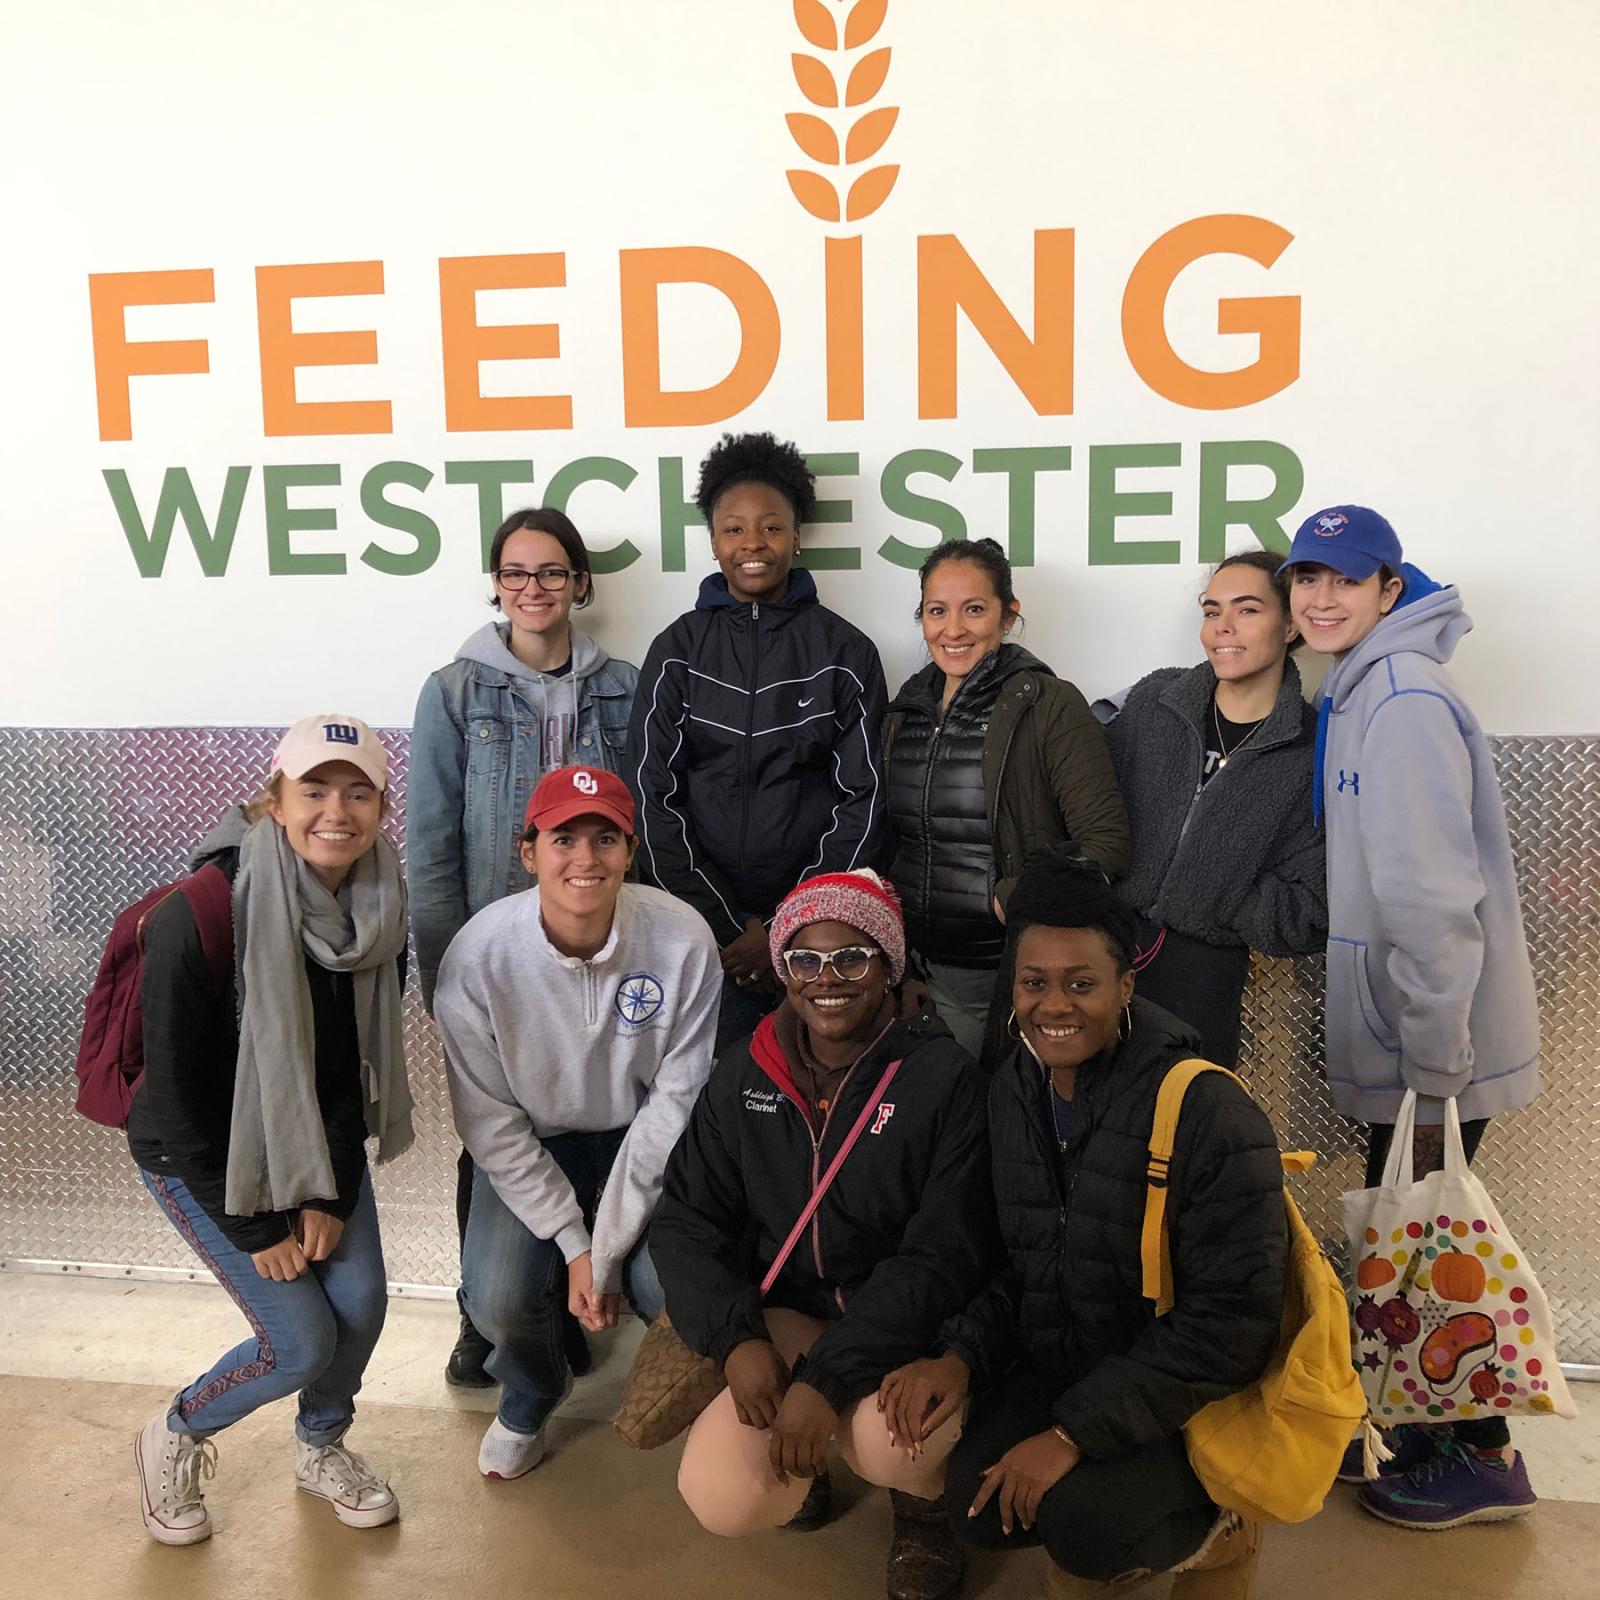 CCAR students infront of the Feeding Westchester logo